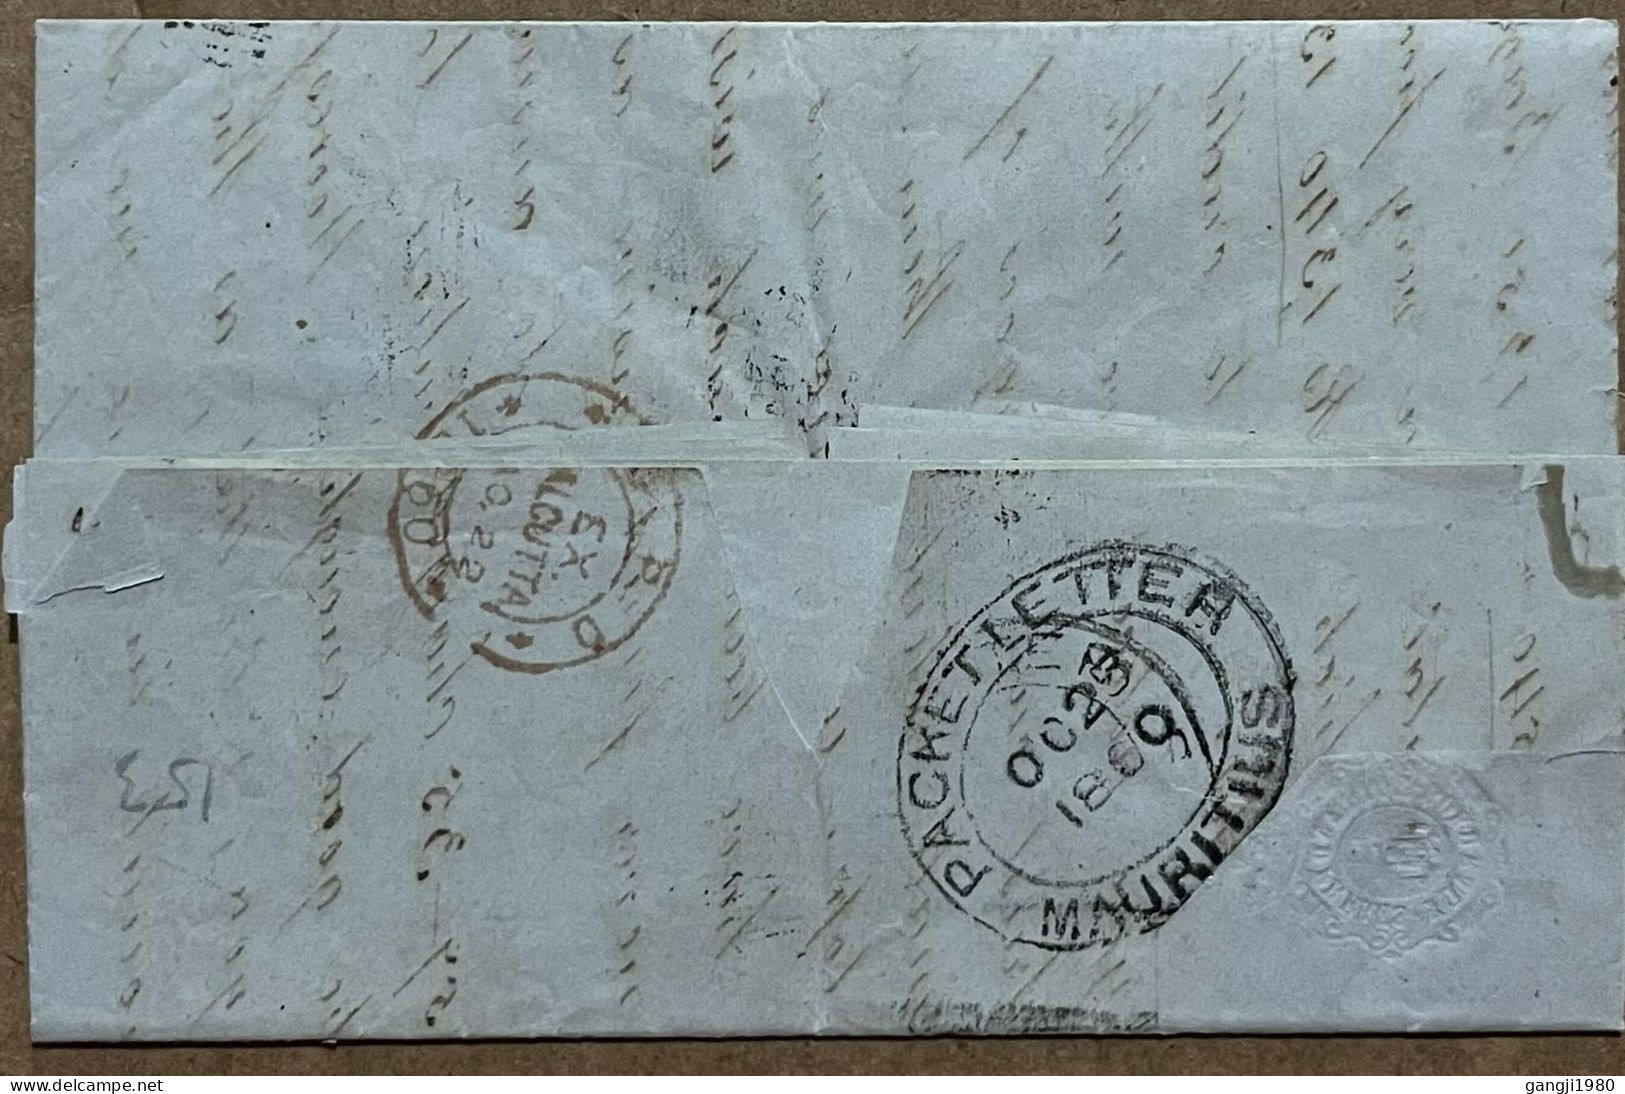 INDIA TO MAURITIUS 1860, INDIA PAID IN BOX, PACKET LETTER MAURITIUS & CALCUTTA RED CANCEL, STEAMER BENGAL VIA ADEN HAND - 1858-79 Compagnie Des Indes & Gouvernement De La Reine